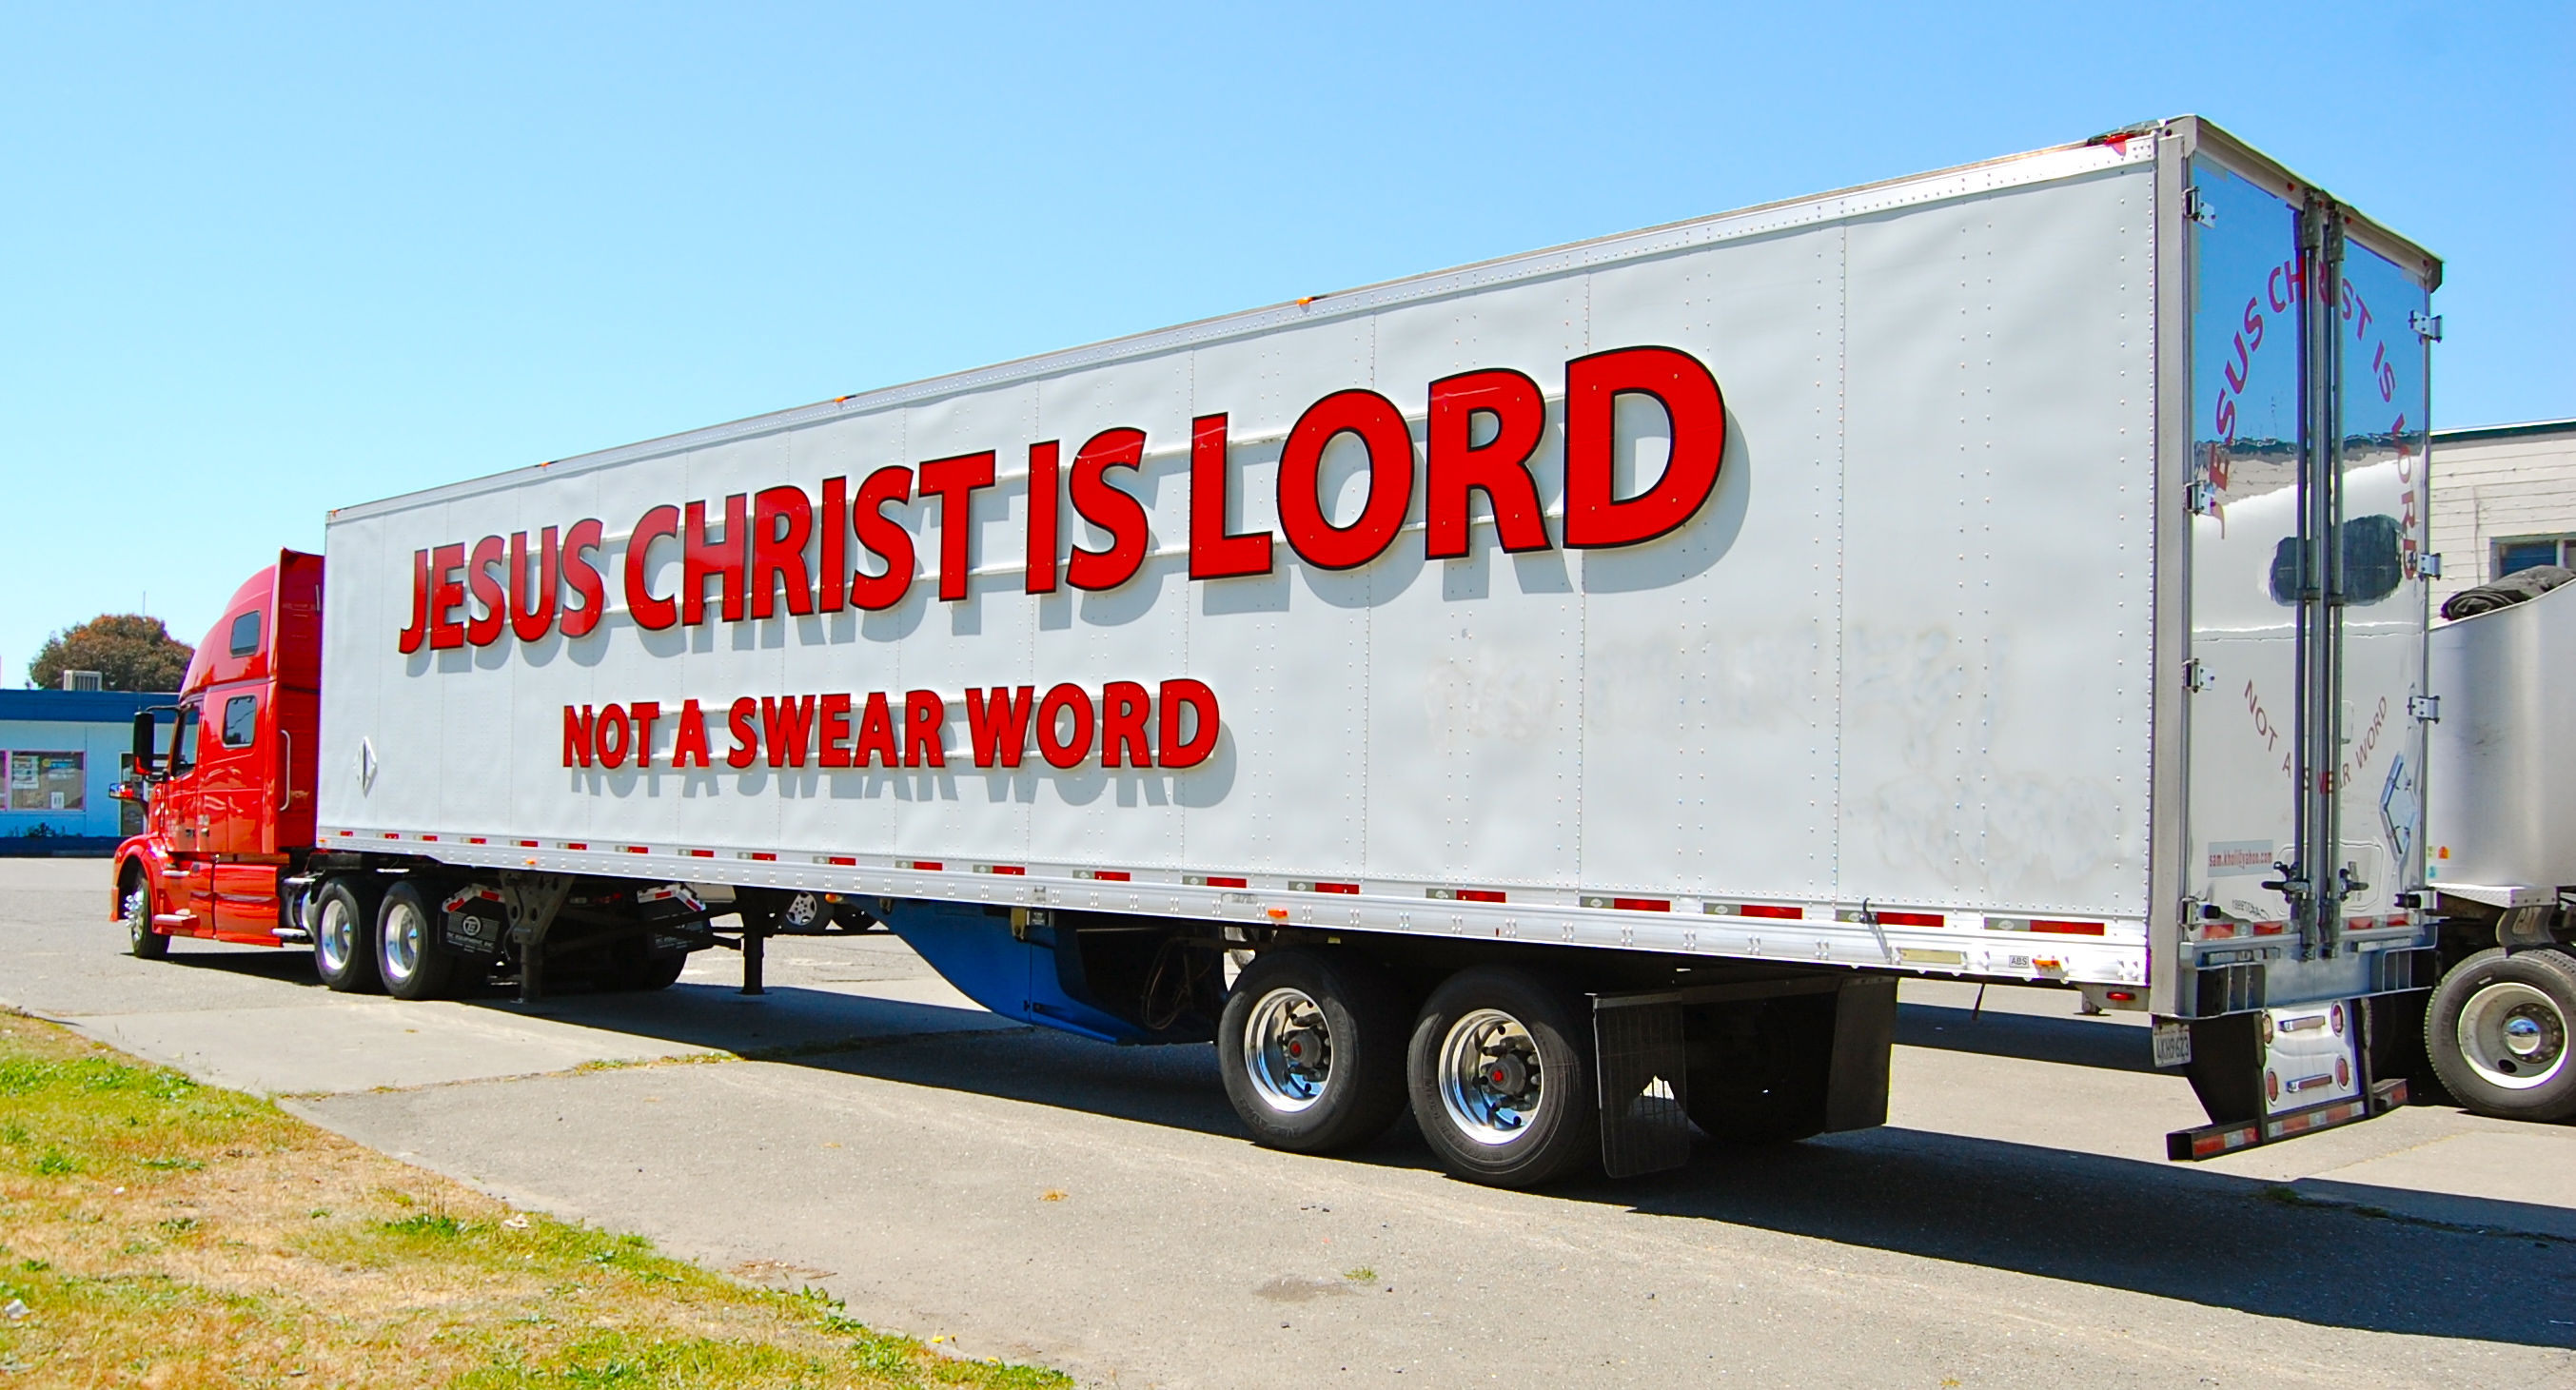 We Talked To The Jesus Christ Is Lord Not A Swear Word Trucker